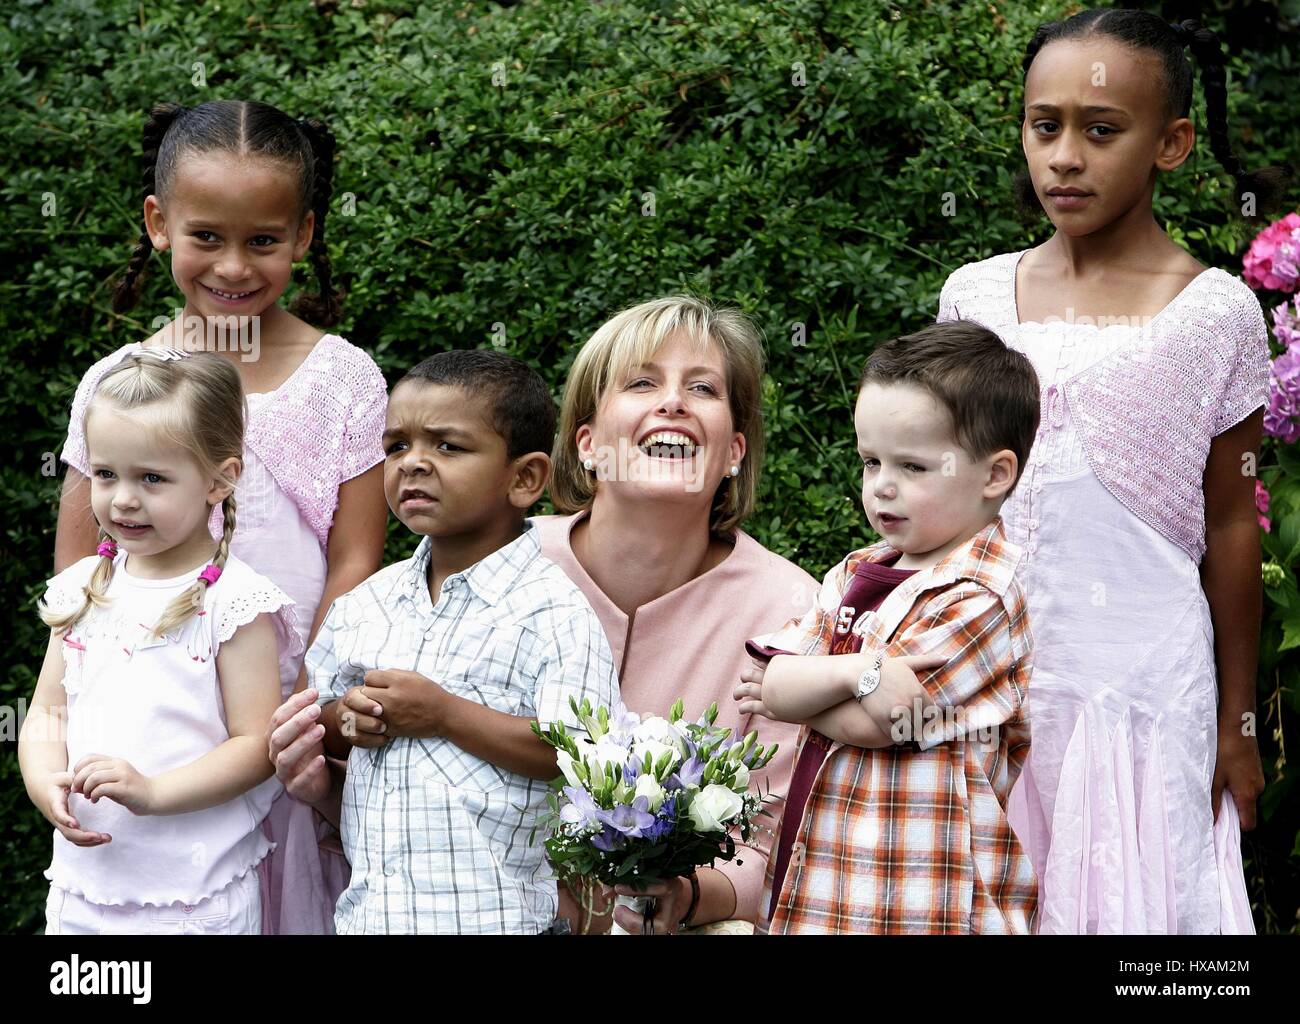 SOPHIE RHYS-JONES COUNTESS OF WESSEX 11 July 2006 RAINBOW HOUSE GREAT BOOKHAM SURREY ENGLAND Stock Photo